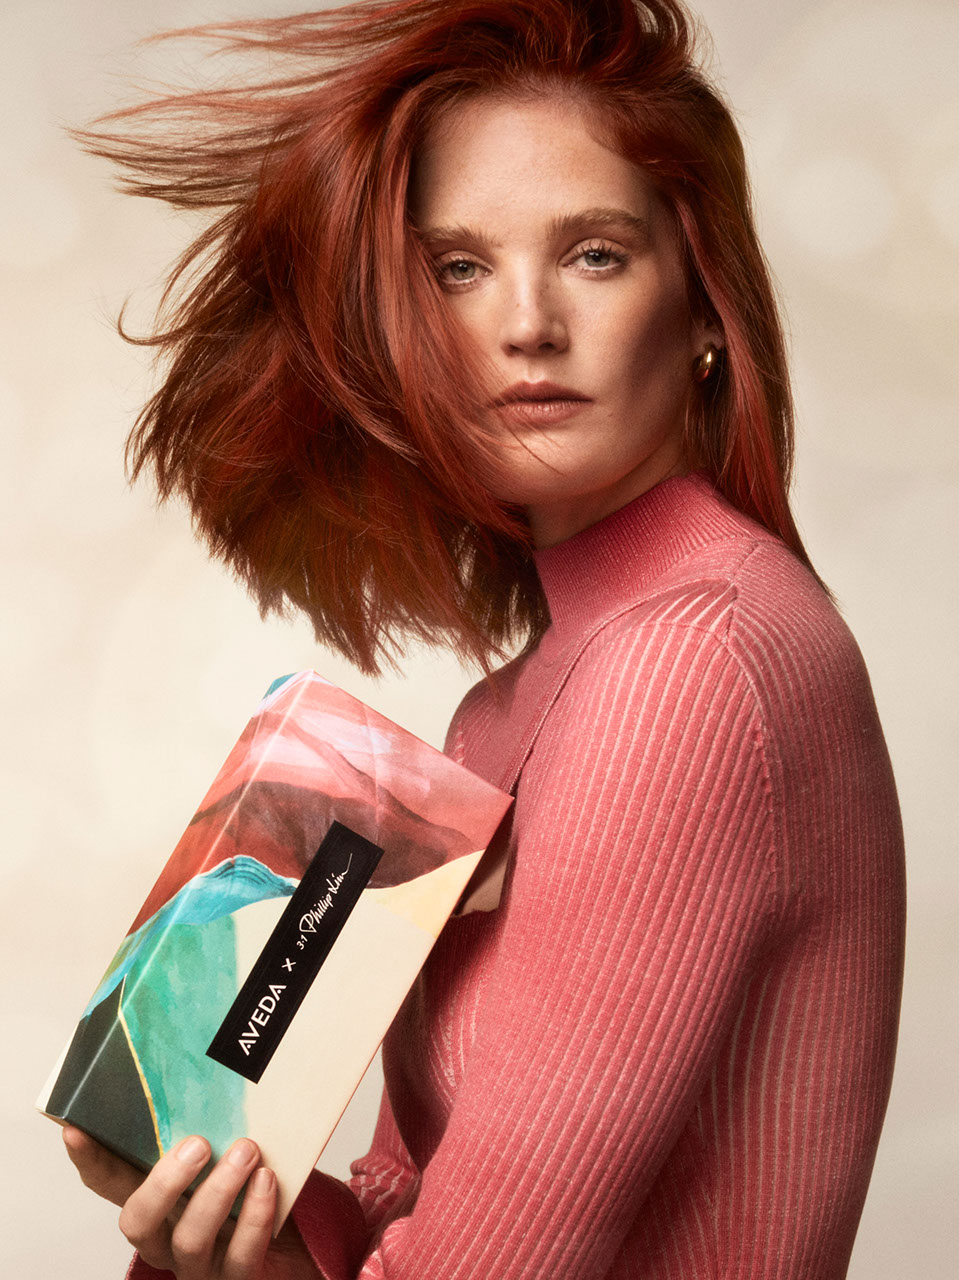 Red Hair Swooped with Aveda Gift